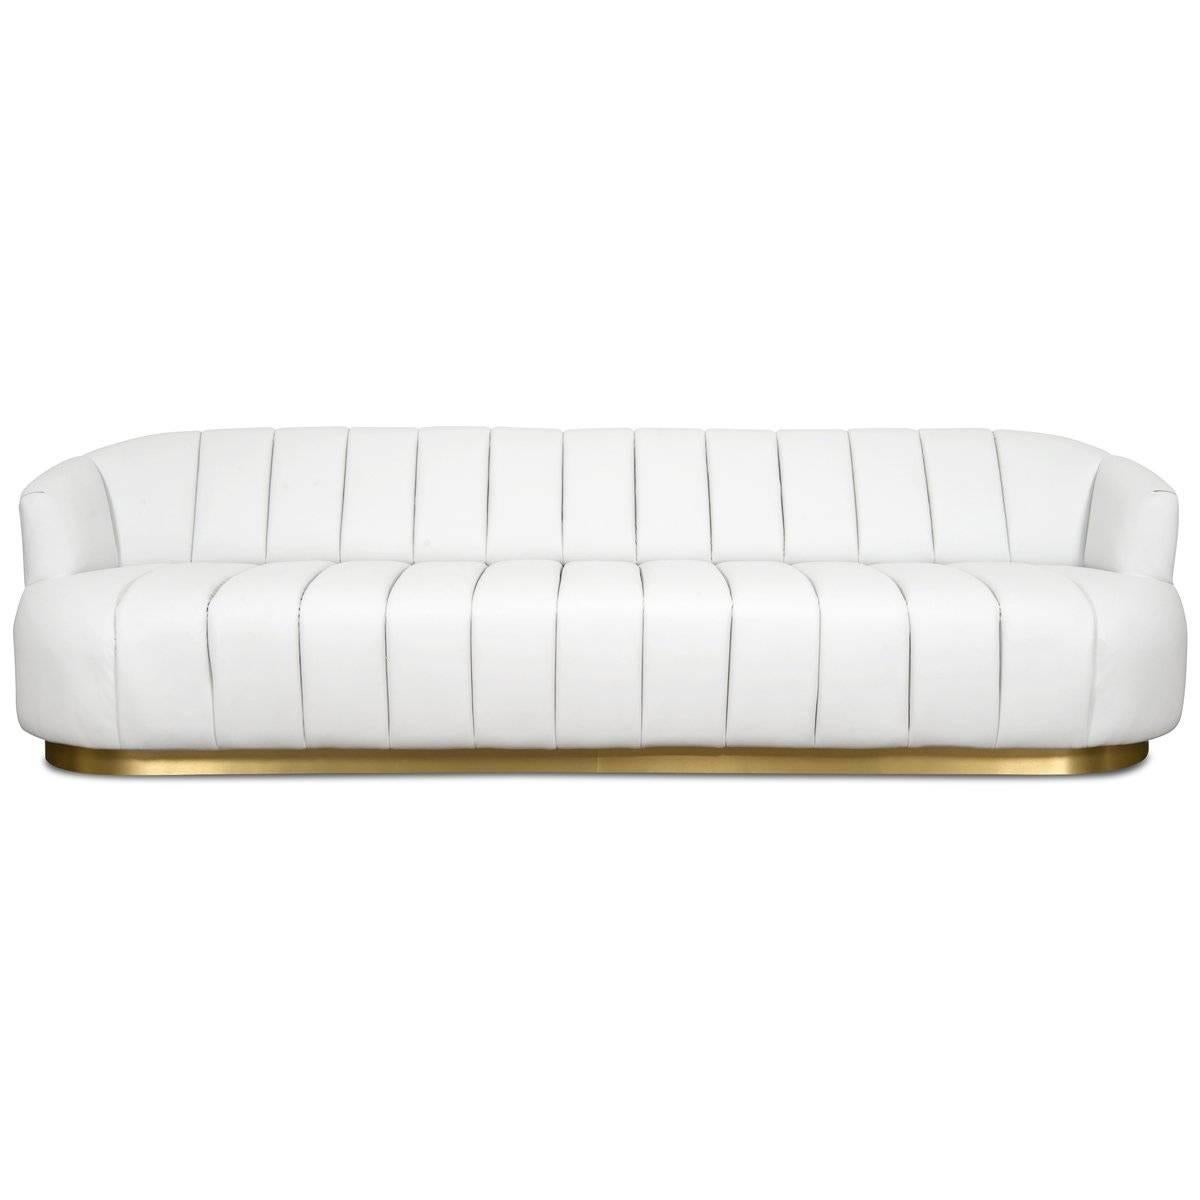 Mid-Century Modern Modern Tufted Pearl White Faux Leather Sofa with Channel Tufting & Brass Toekick For Sale